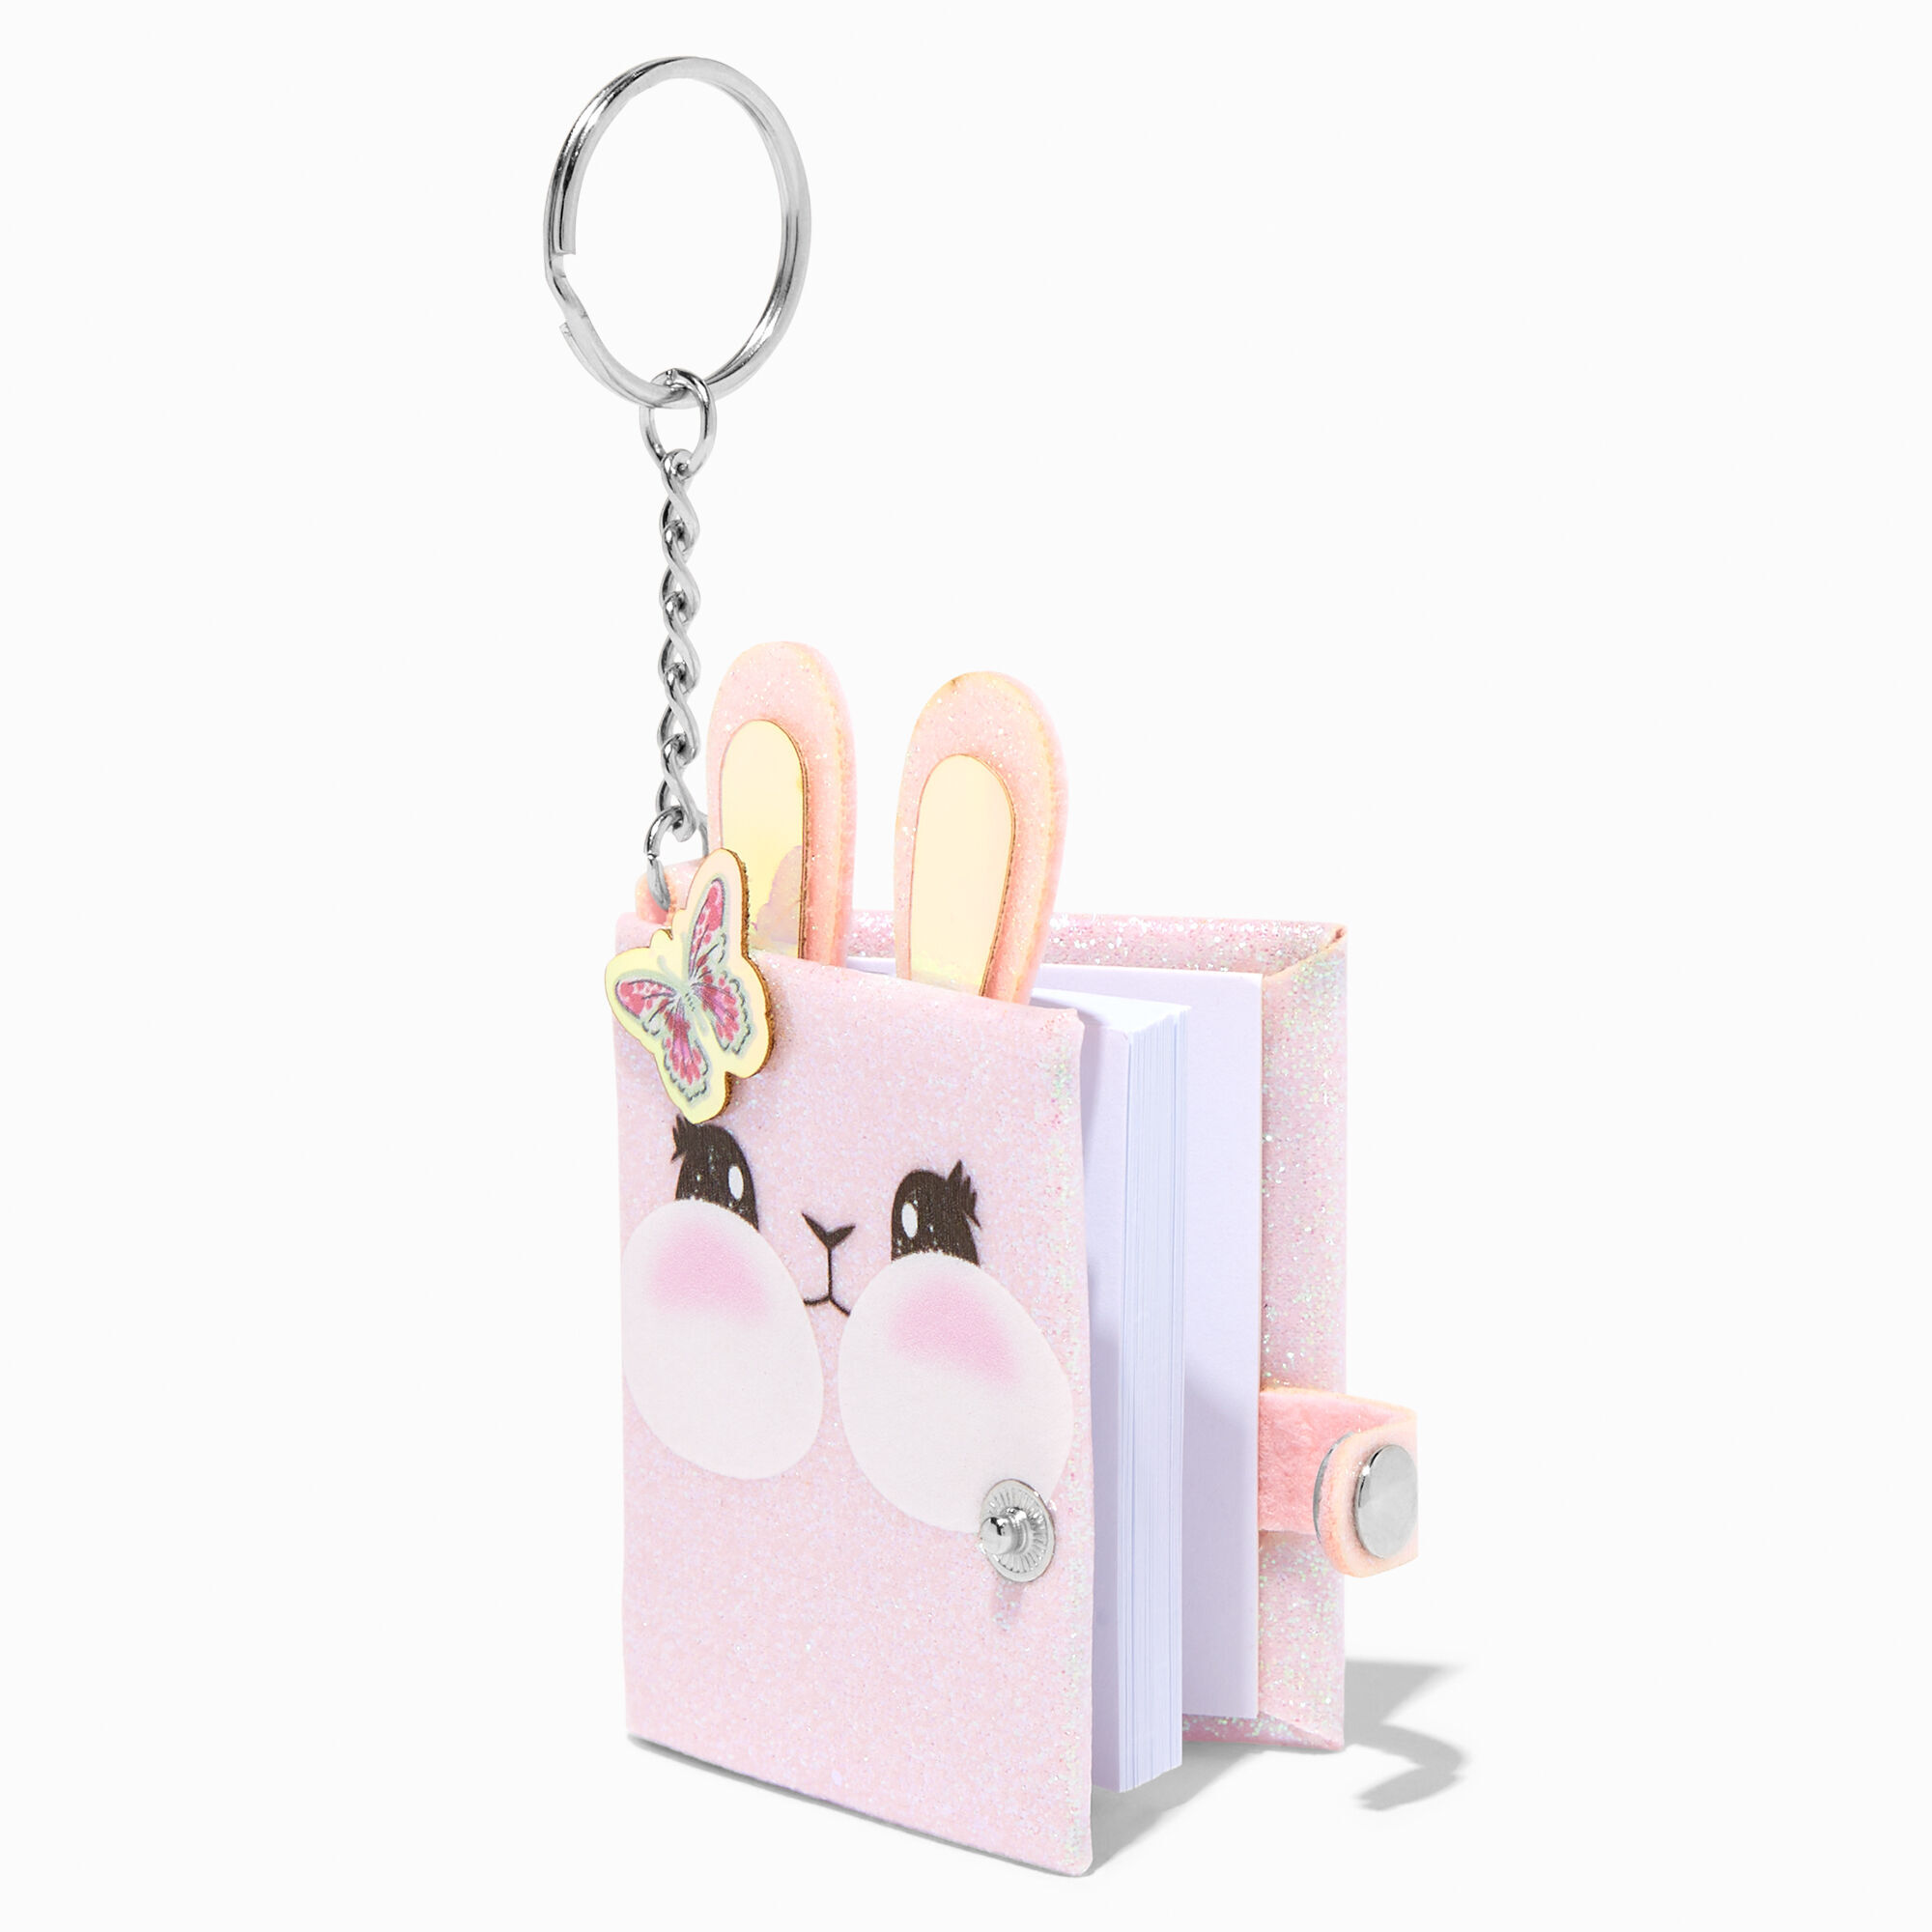 View Claires Glitter Butterfly Bunny Mini Diary Keychain information